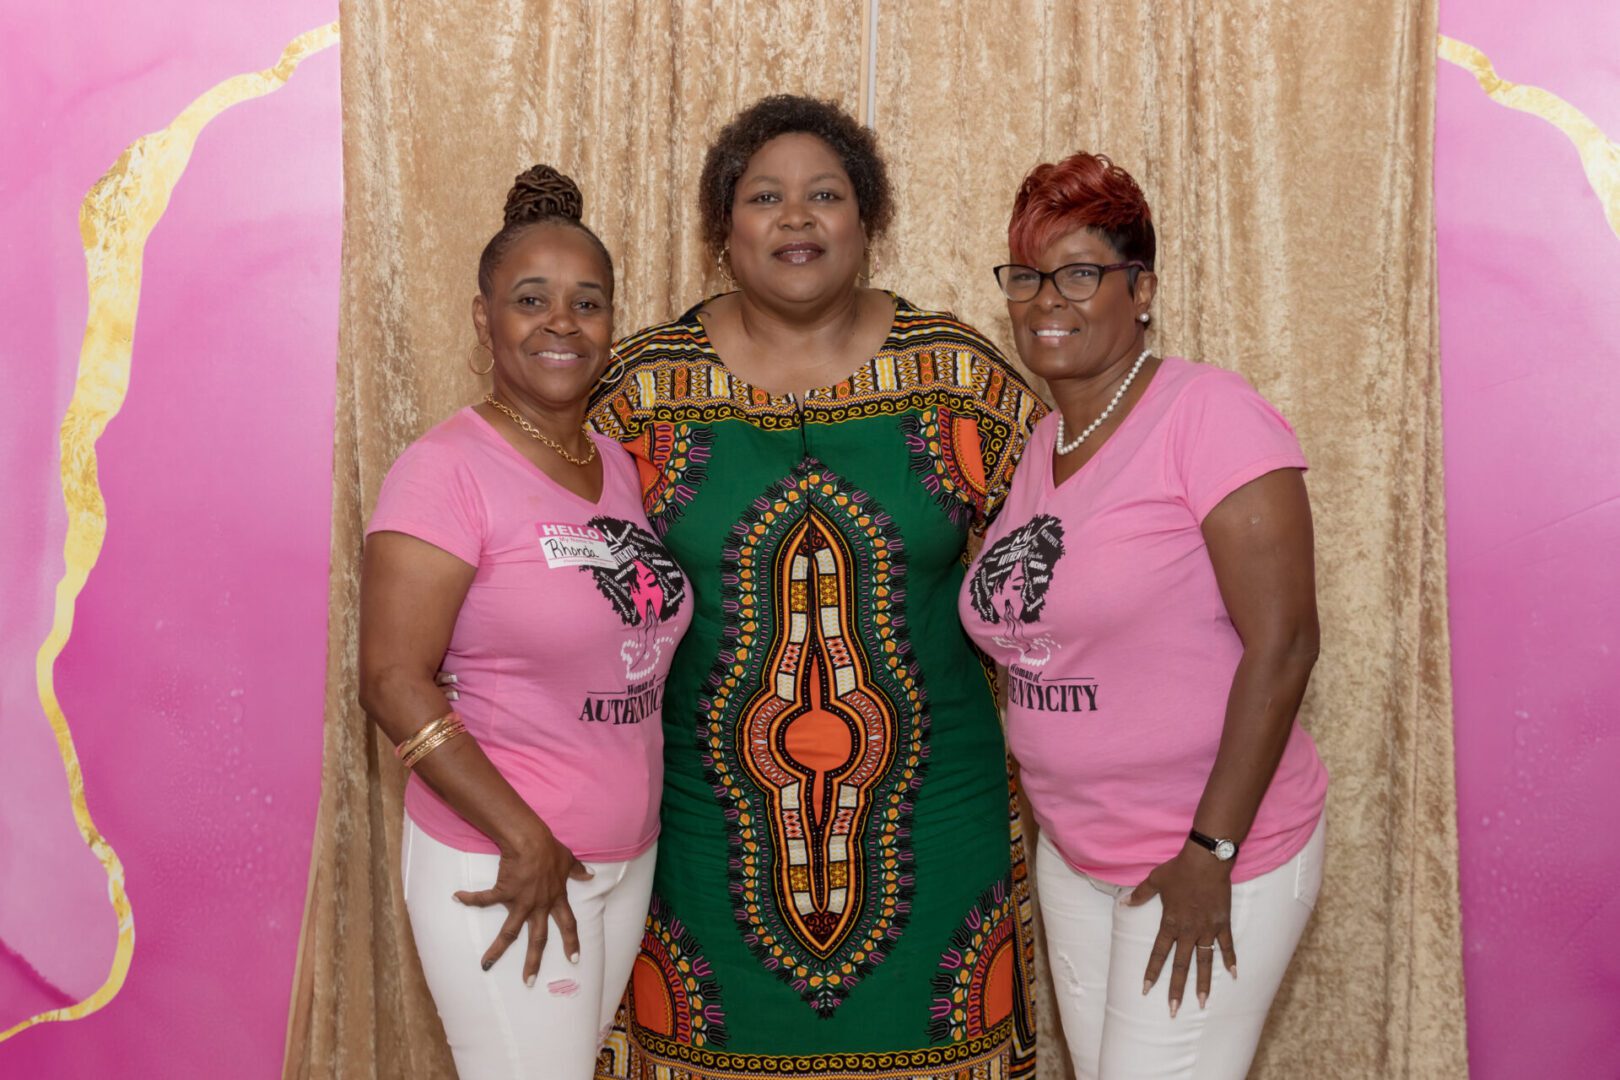 Three women posing for a picture in front of a curtain.